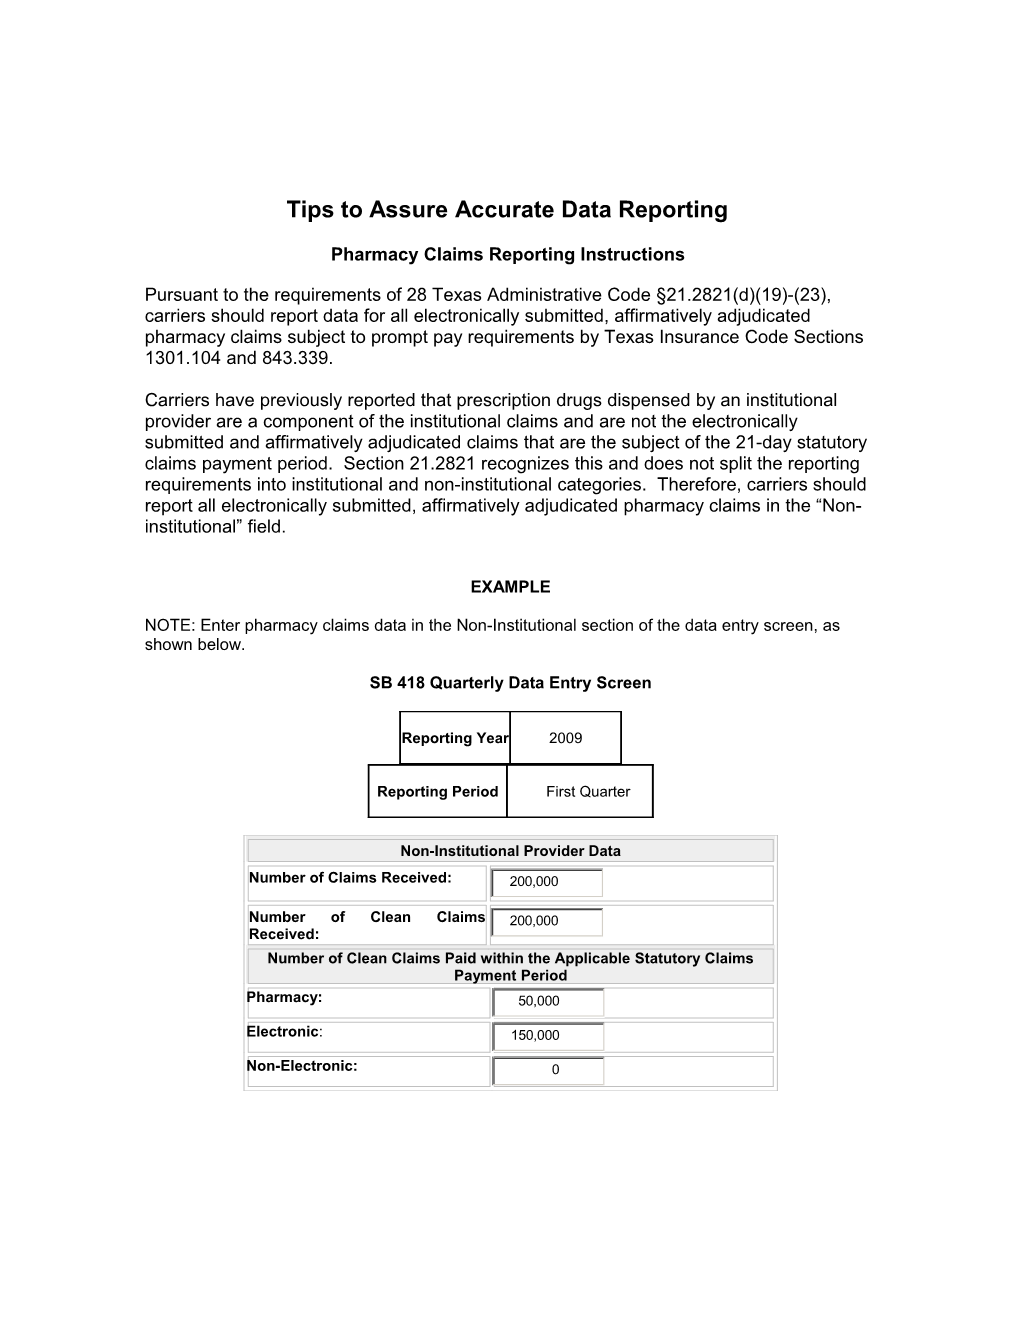 Tips to Assureaccurate Data Reporting